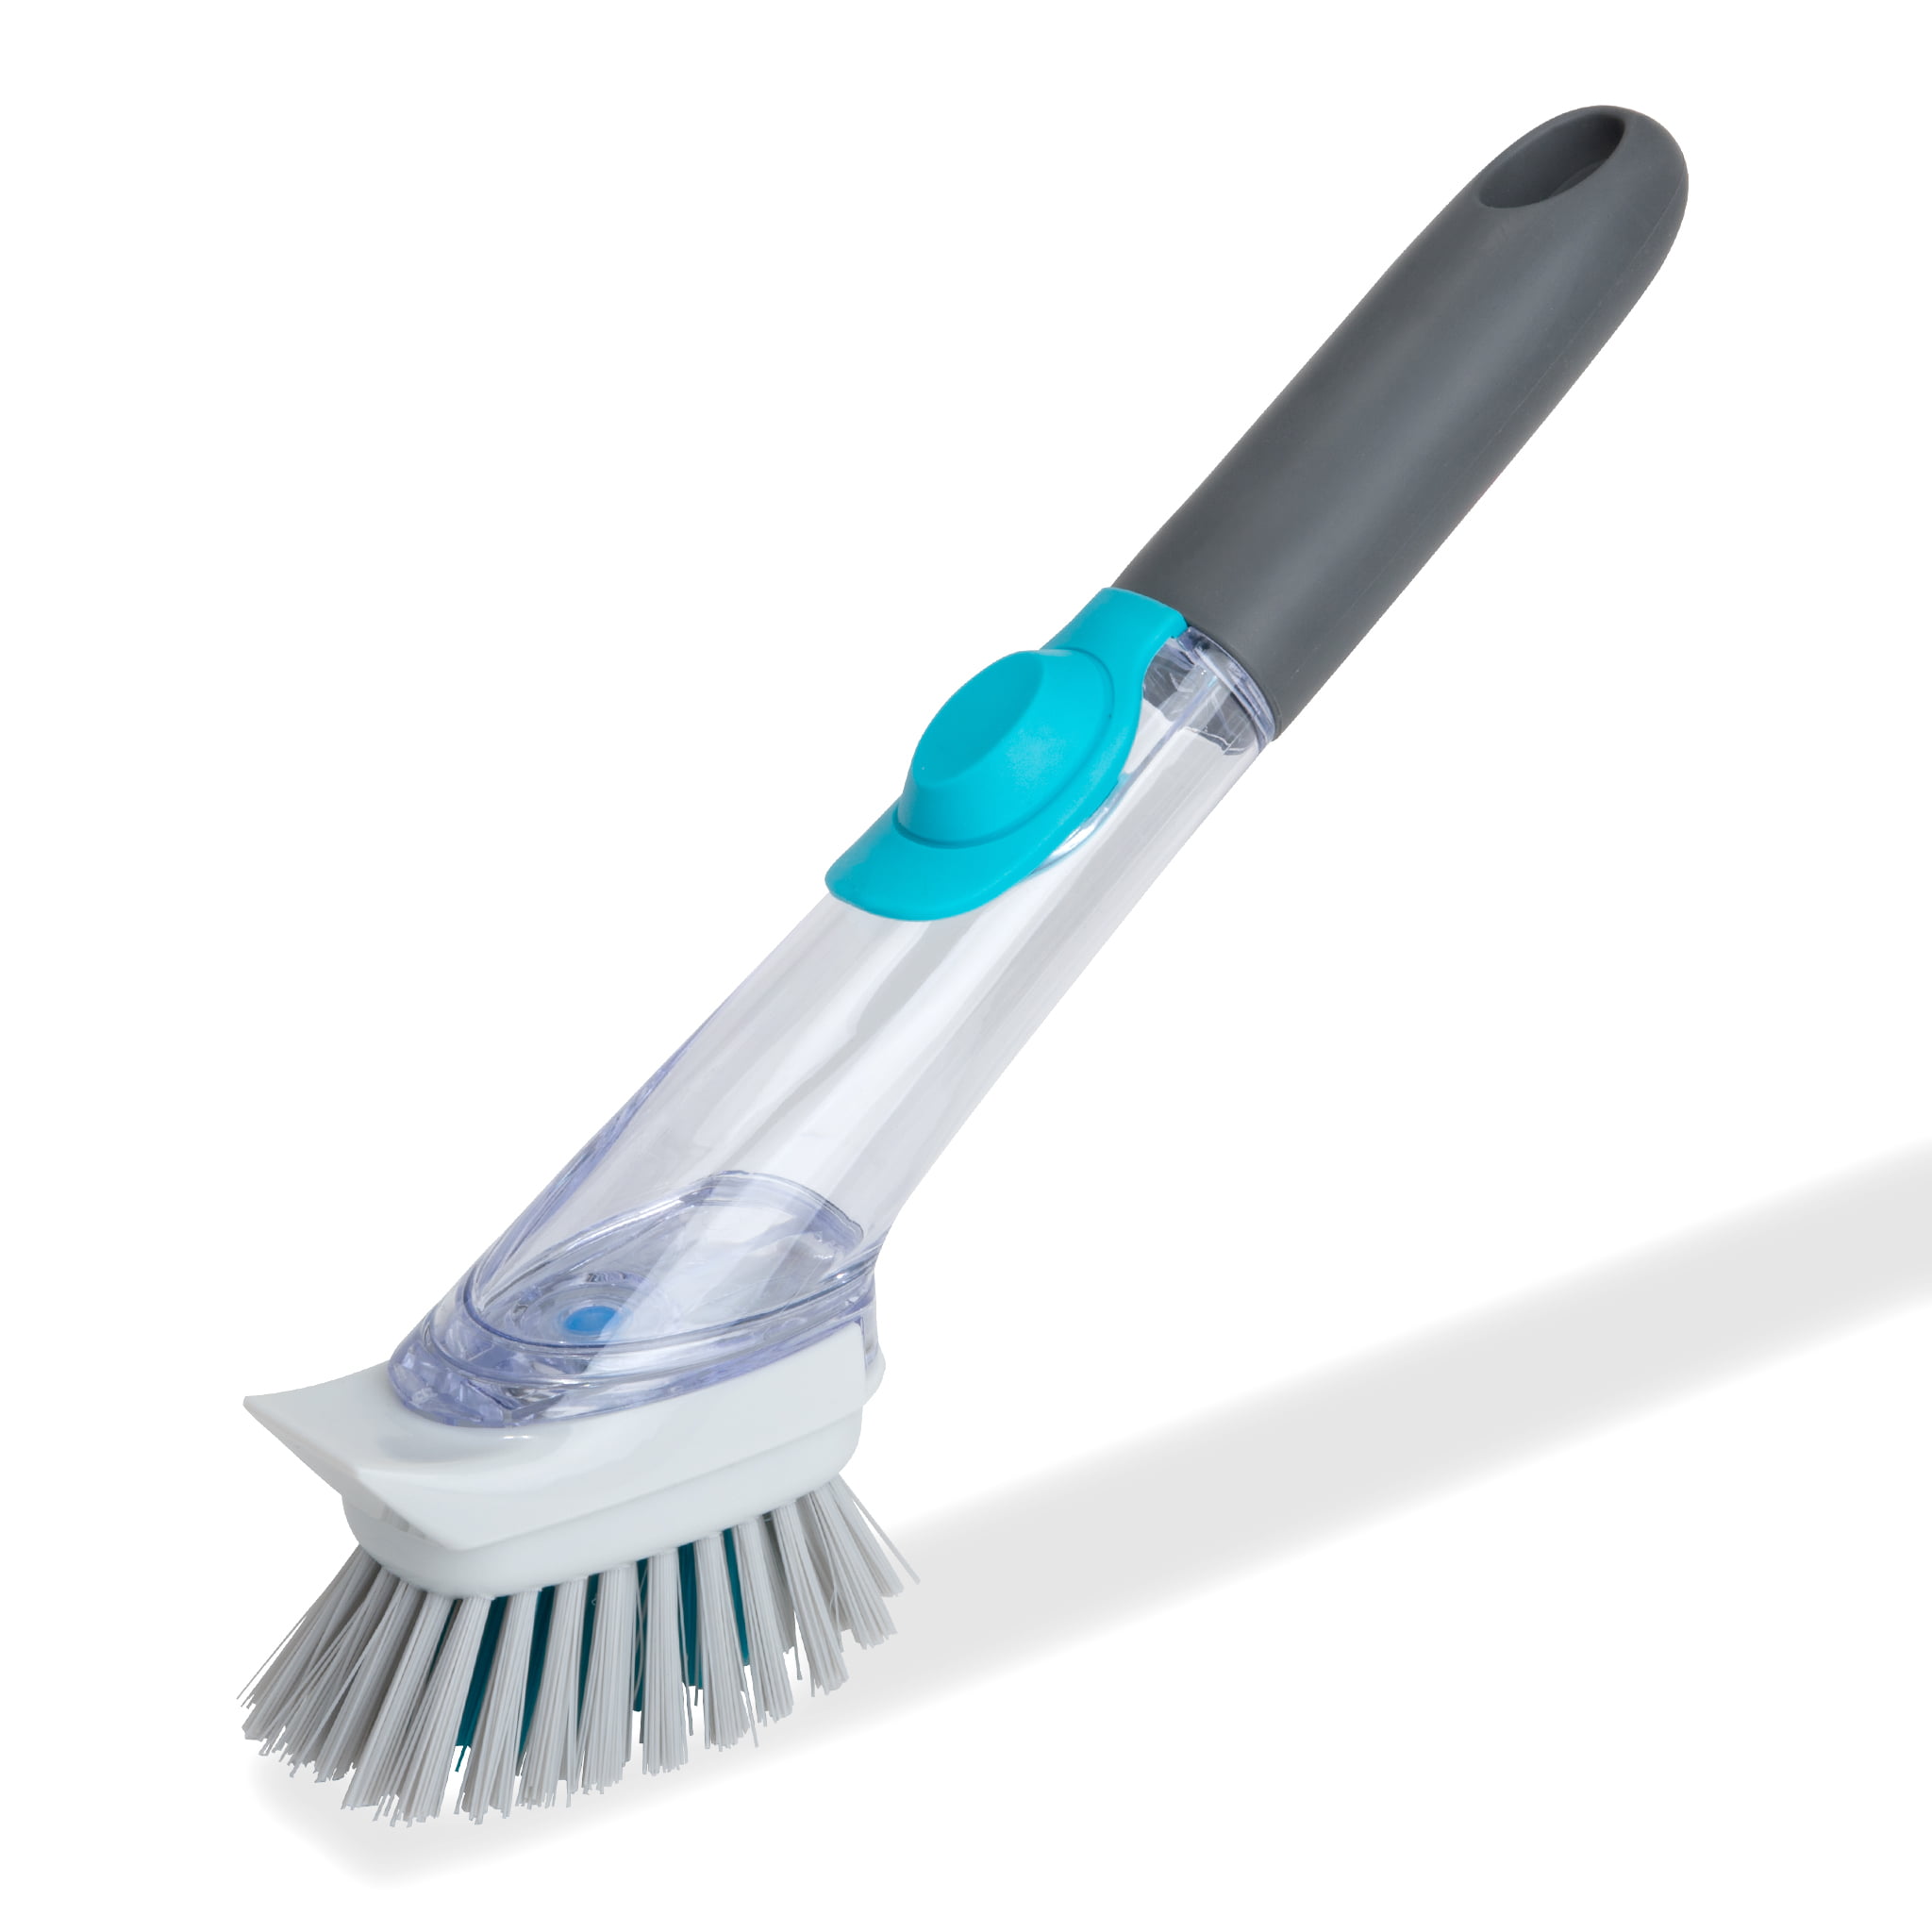 Soap Dispensing Dish Washing Brush Rush Service - NW04794 - IdeaStage  Promotional Products